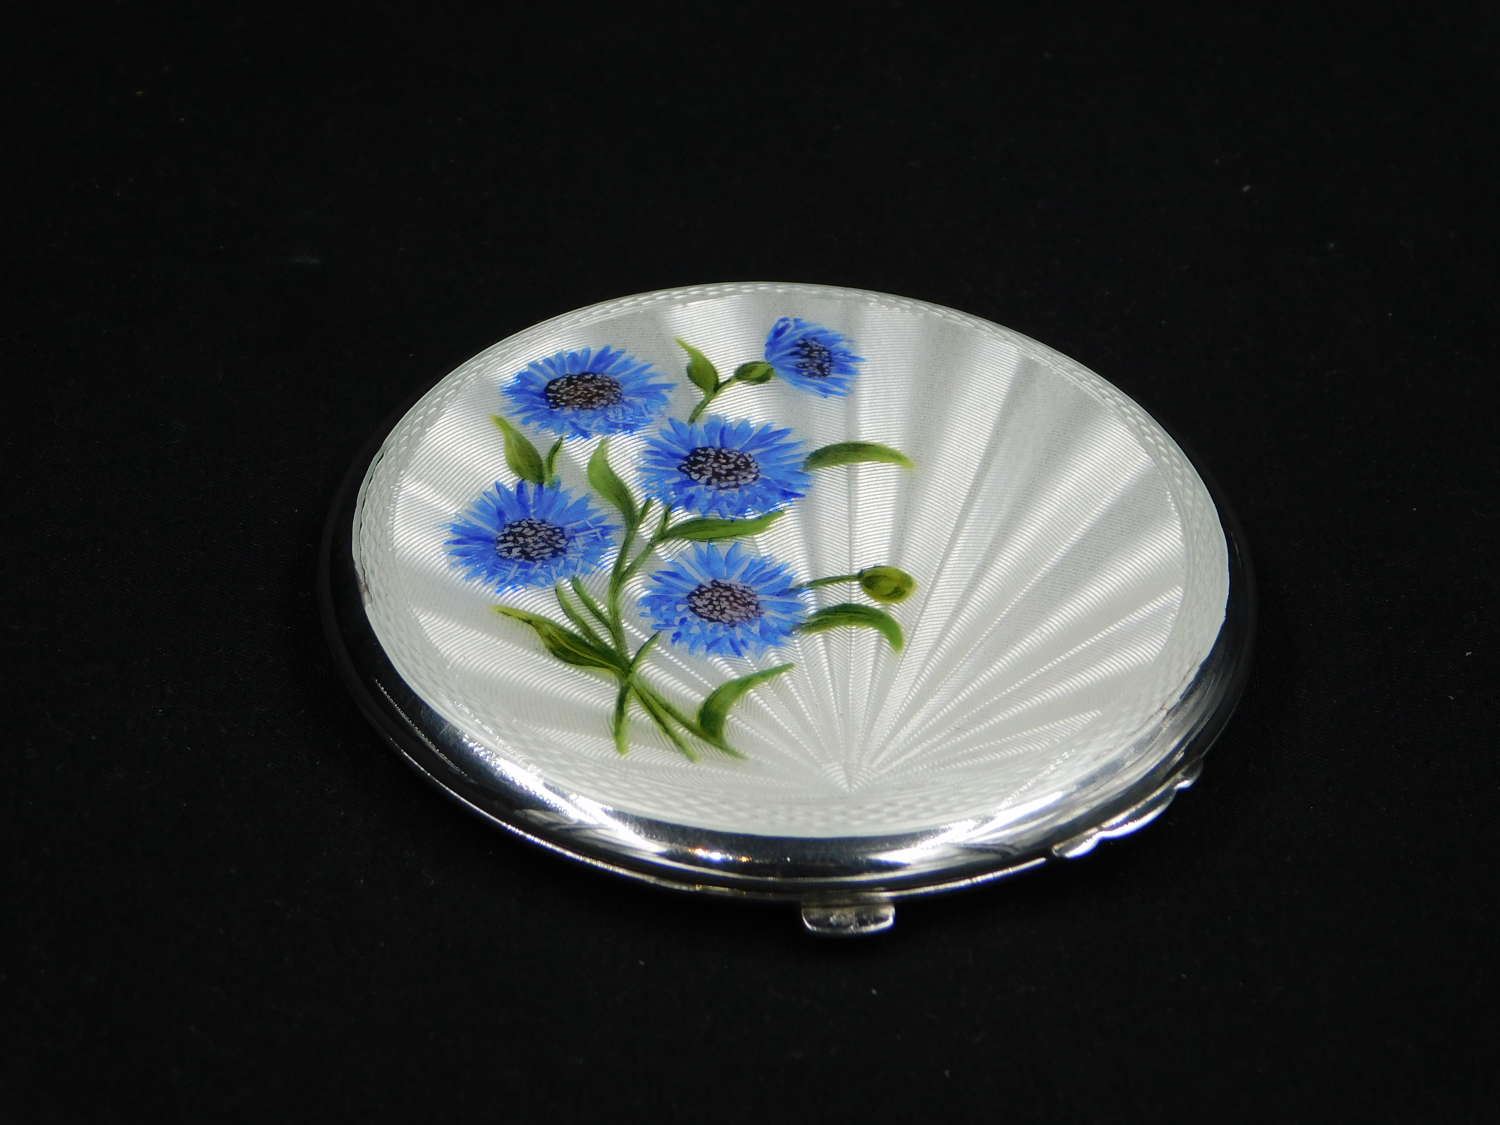 Silver and Guilloche Enamel Powder Compact